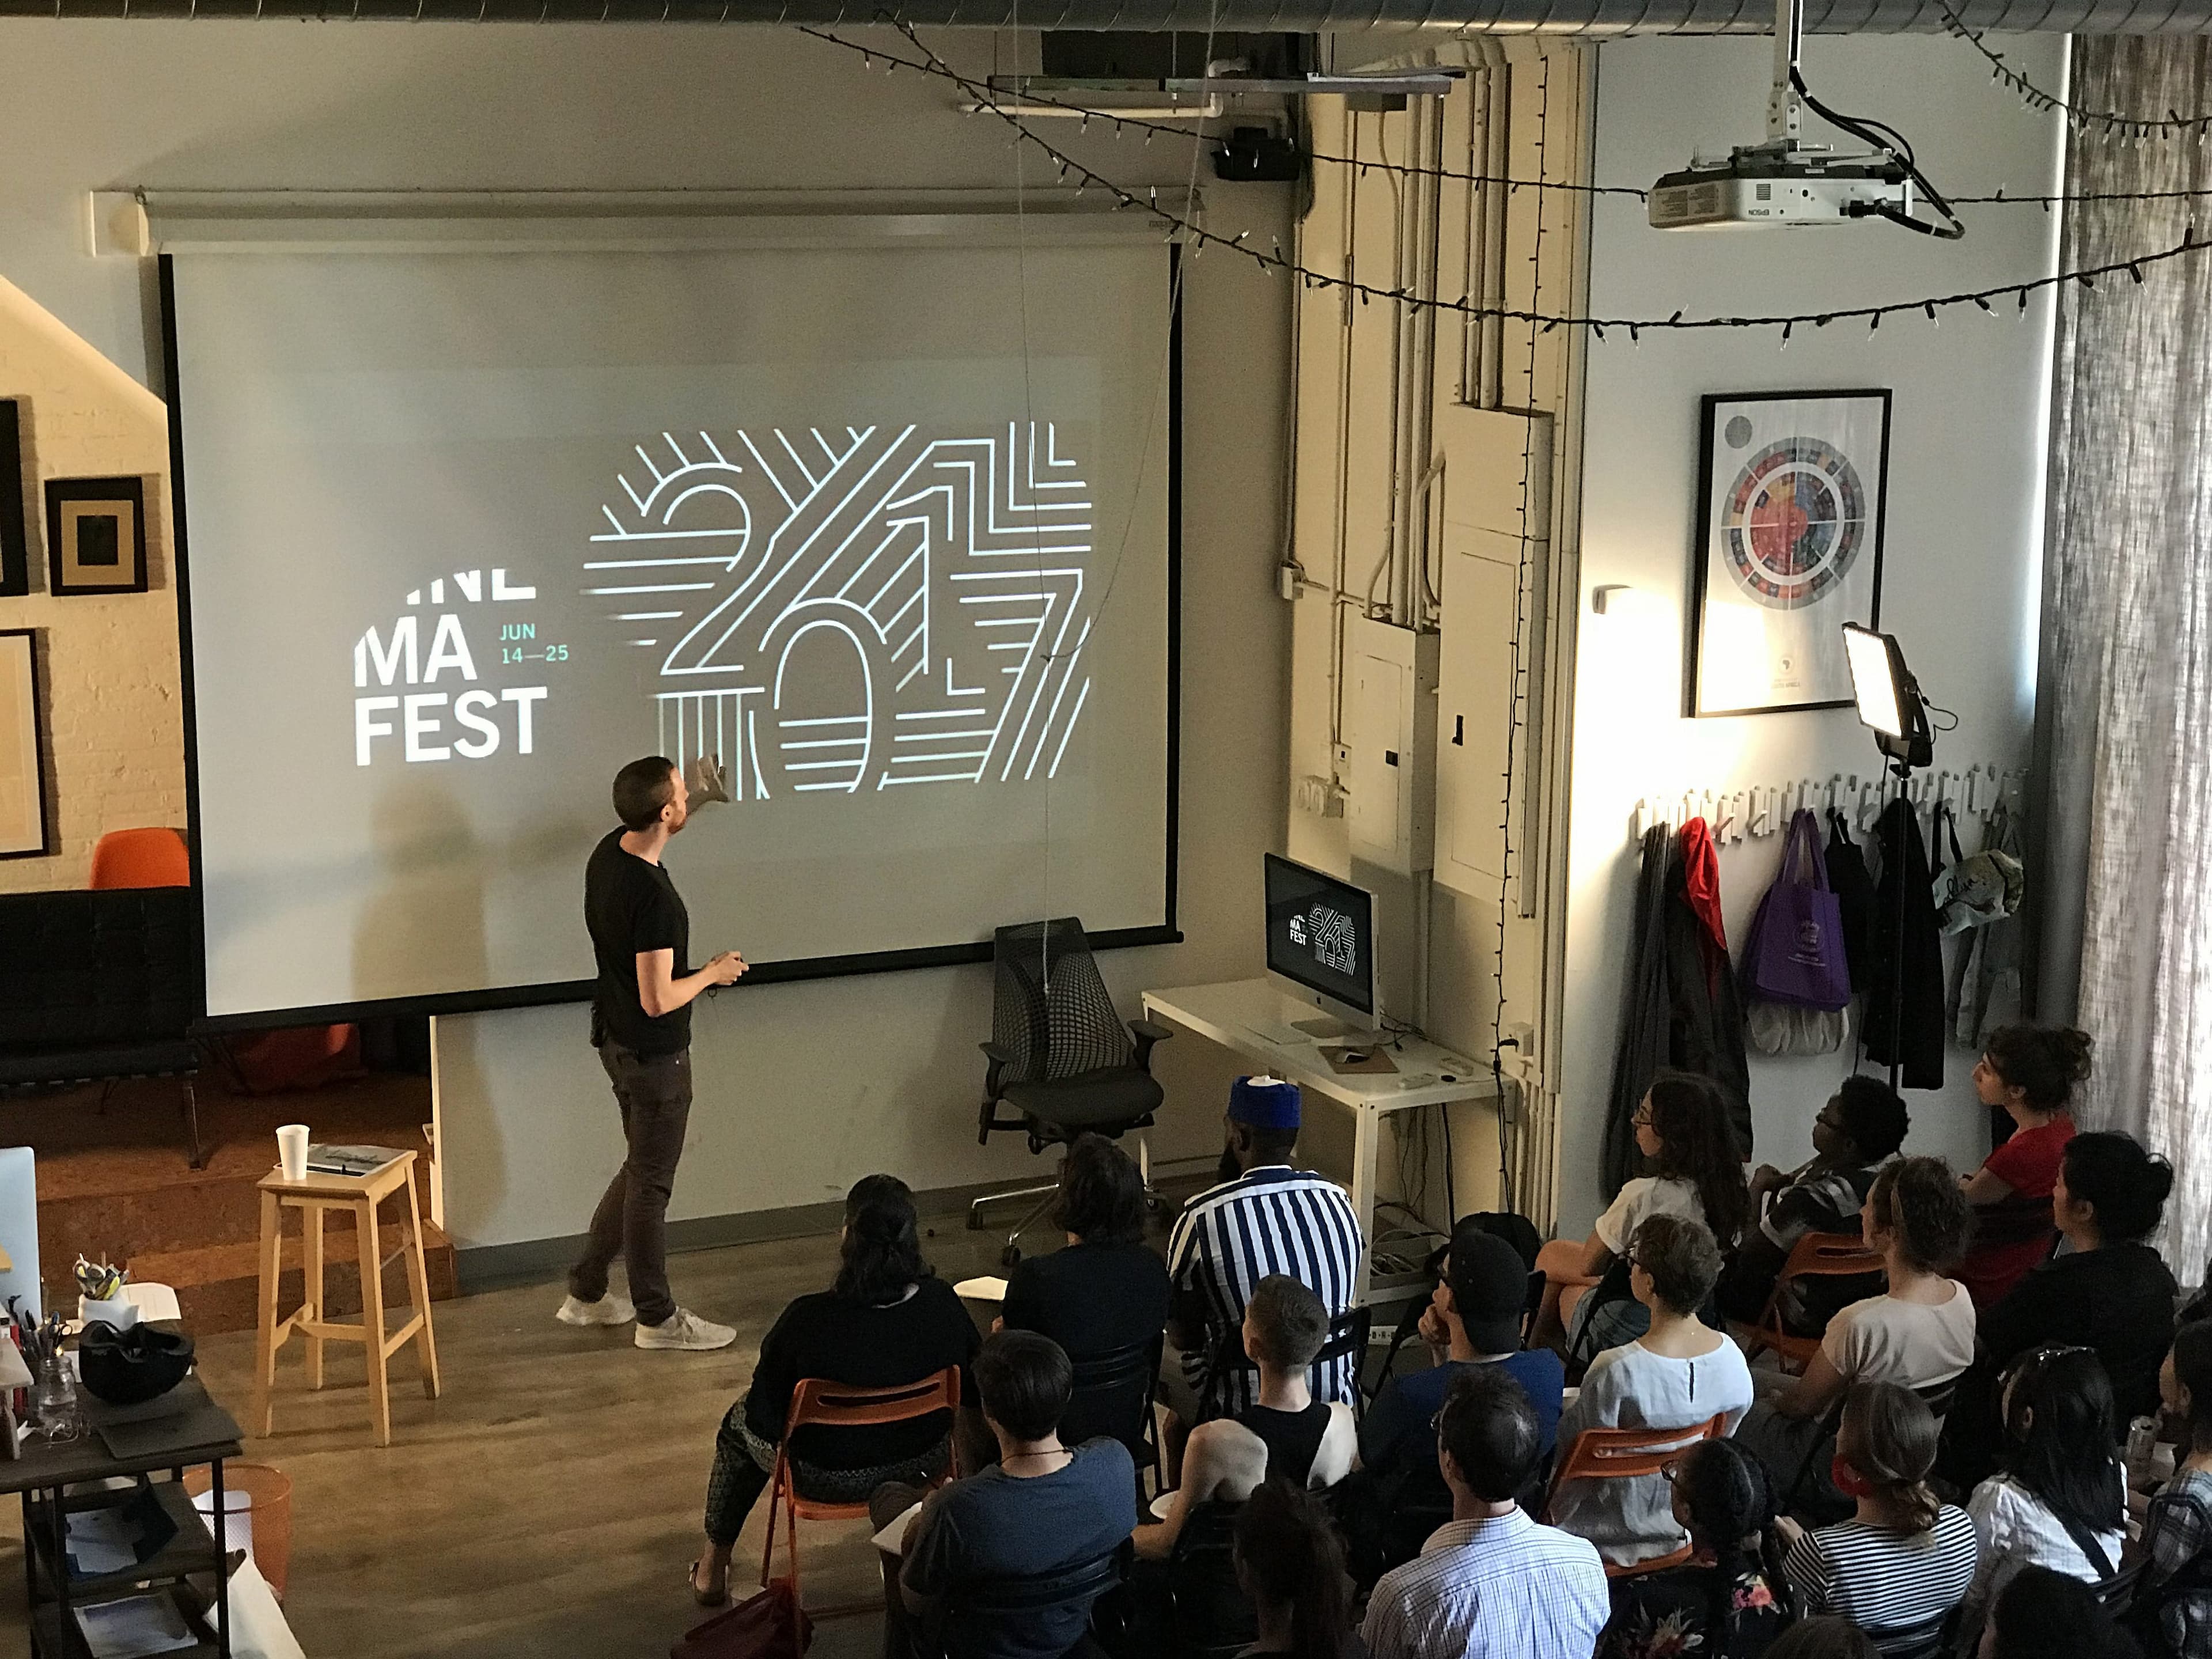 A person stands in front of an audience presenting slides projected on a screen that reads “ANIMA FEST 2017”. The room is dimly lit, with string lights on the ceiling and various framed pictures on the walls. The audience is seated and attentive.